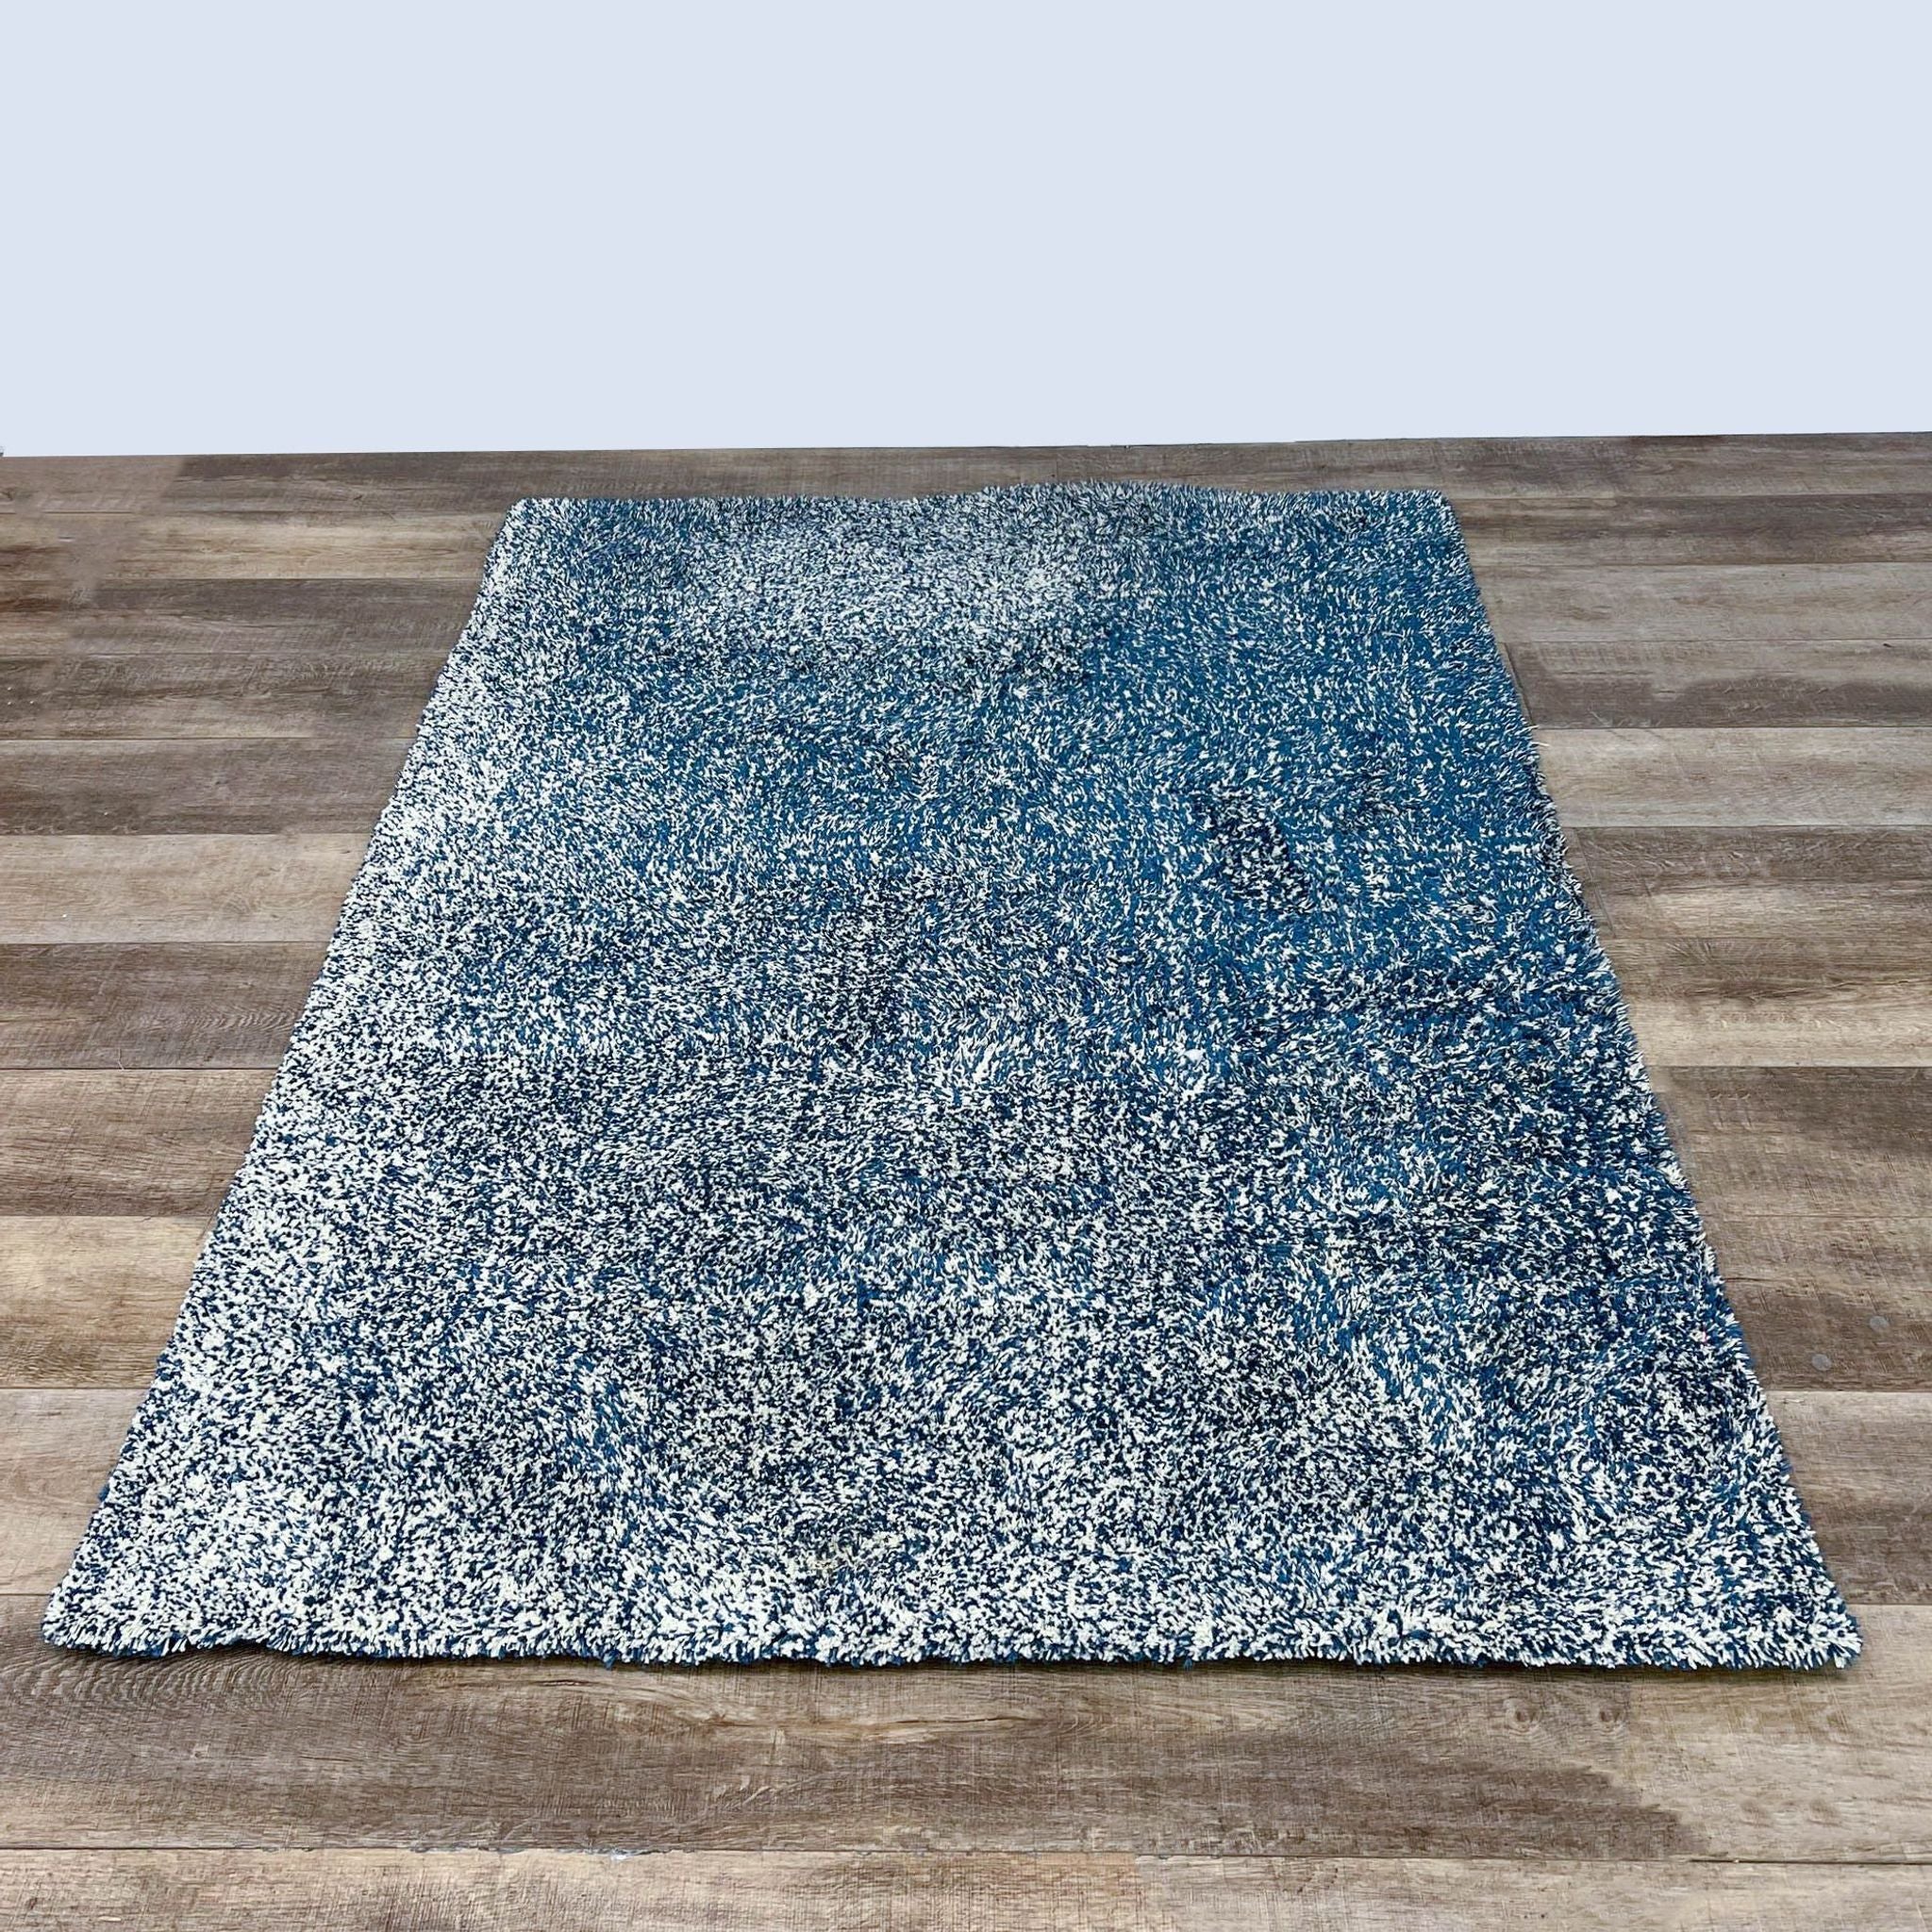 KAS Bliss 5'x7' area rug on wooden floor, showcasing its stain-resistant 1" polyester pile in shades of blue and white.